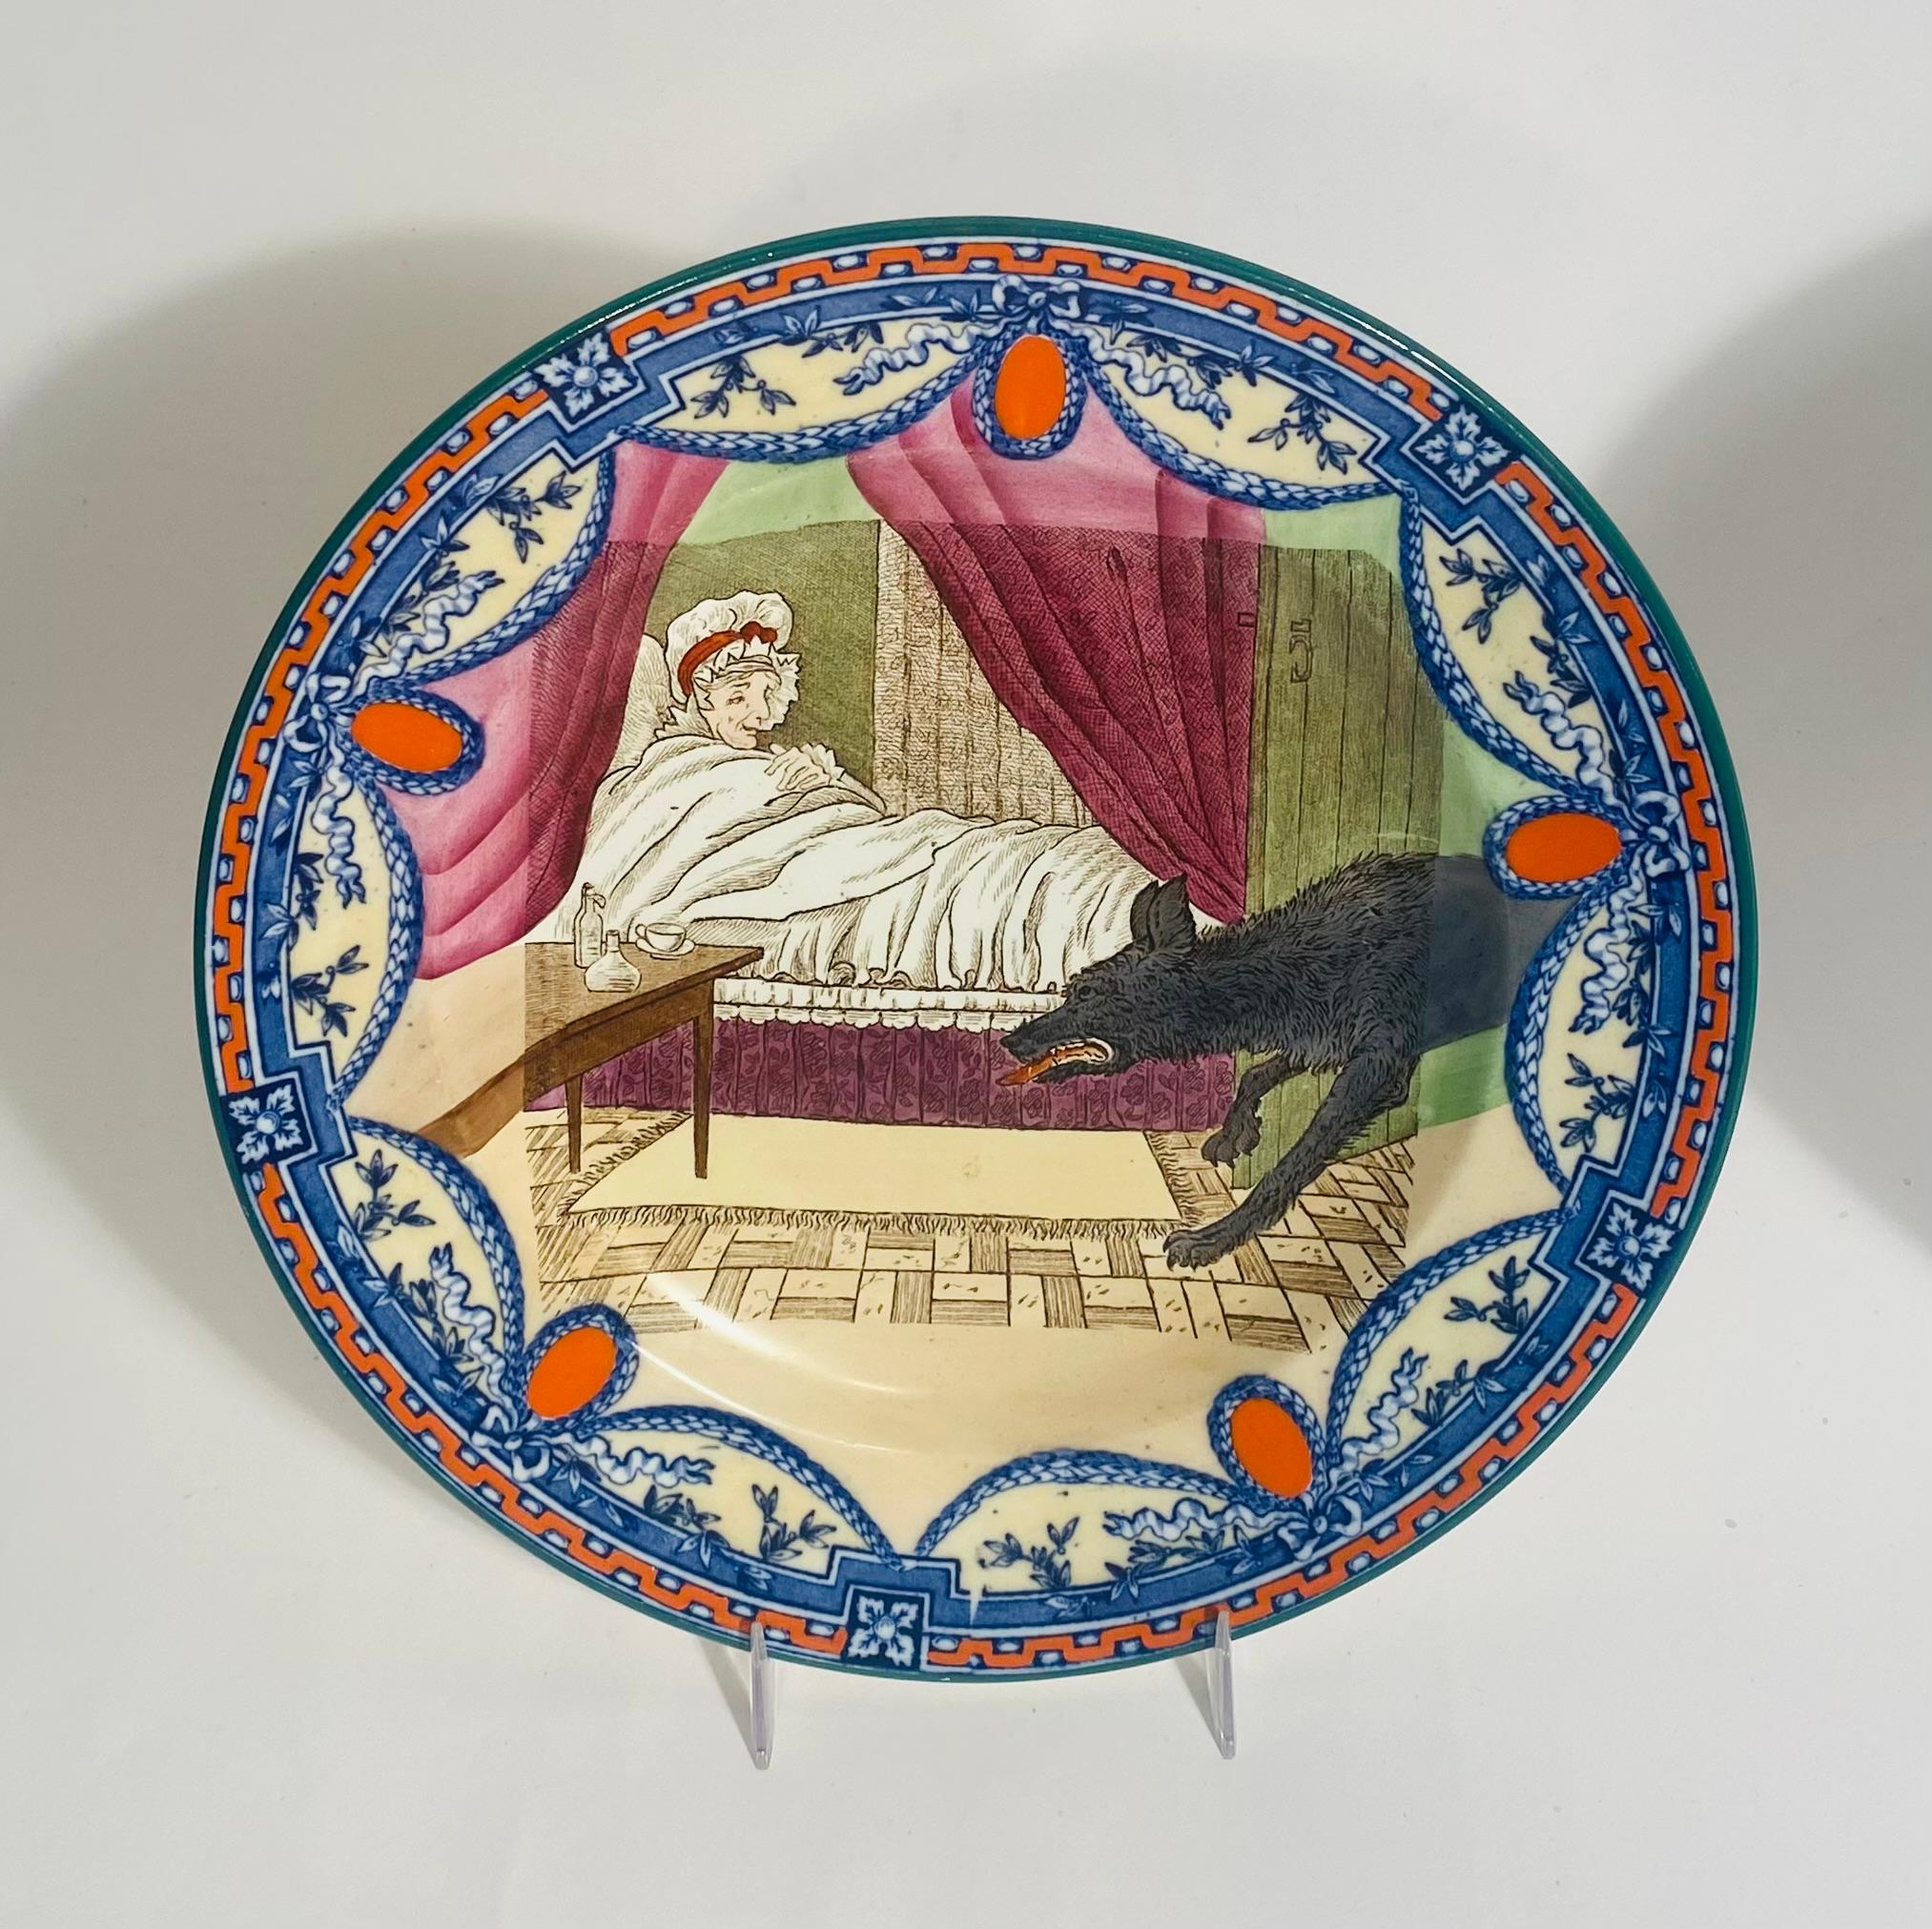 Collector Quality set of 2 plates from Wedgwood's iconic Little Red Riding Hood Series. A combination of detailed transferware and hand coloring brings these plates to life. We have the wolf entering into Grandma's bedroom on the one plate and then